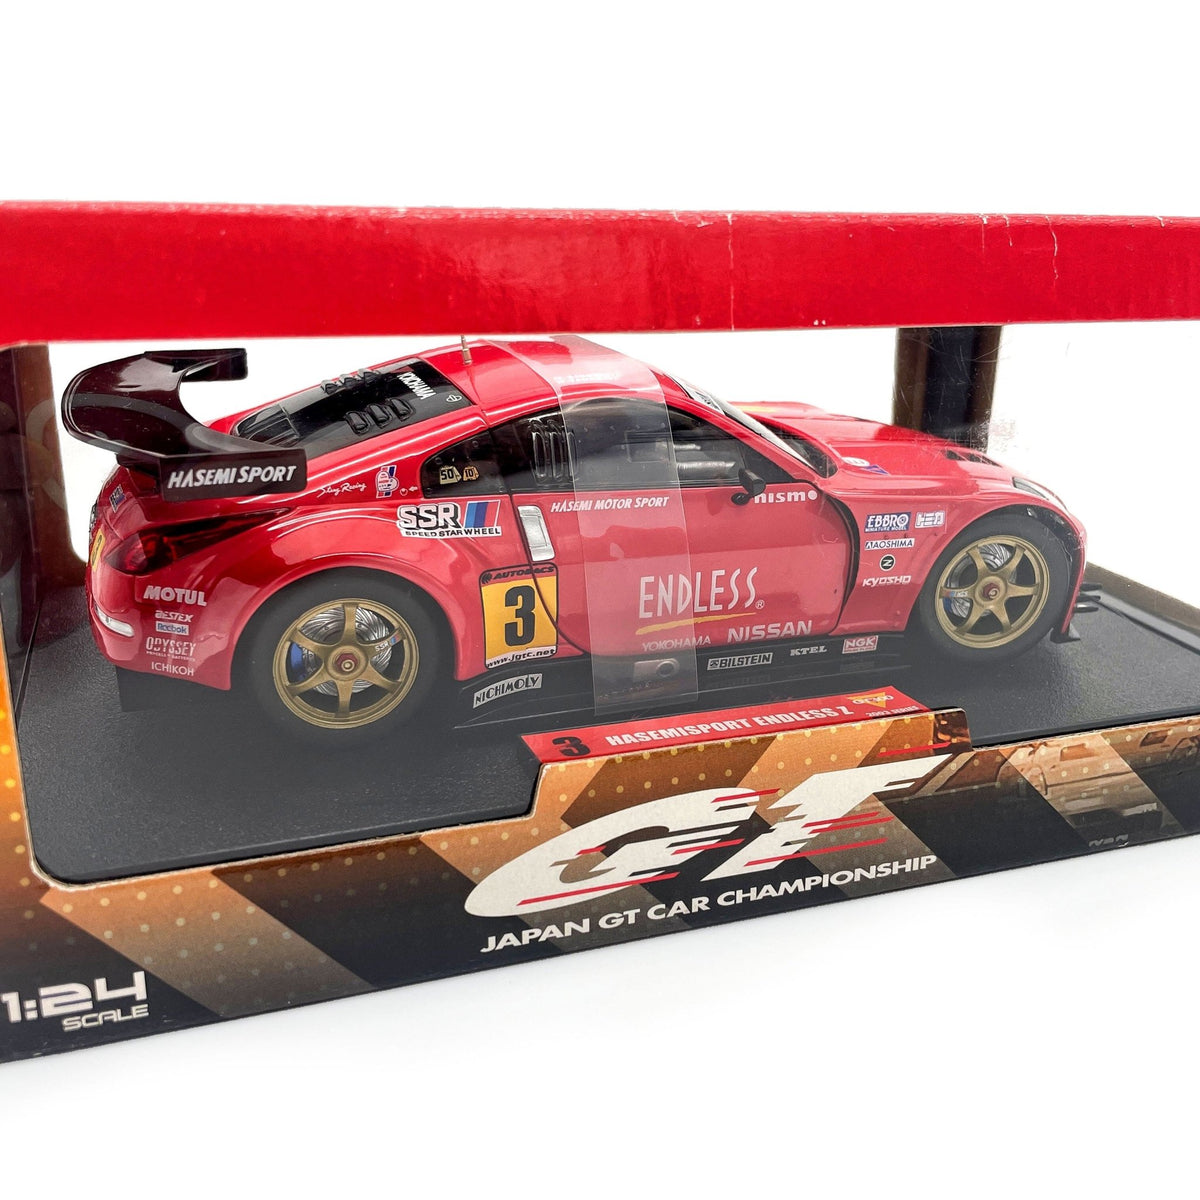 Rare Muscle Machines Japan GT Car Hasemisport Endless Z Diecast 1:24 - Sugoi JDM